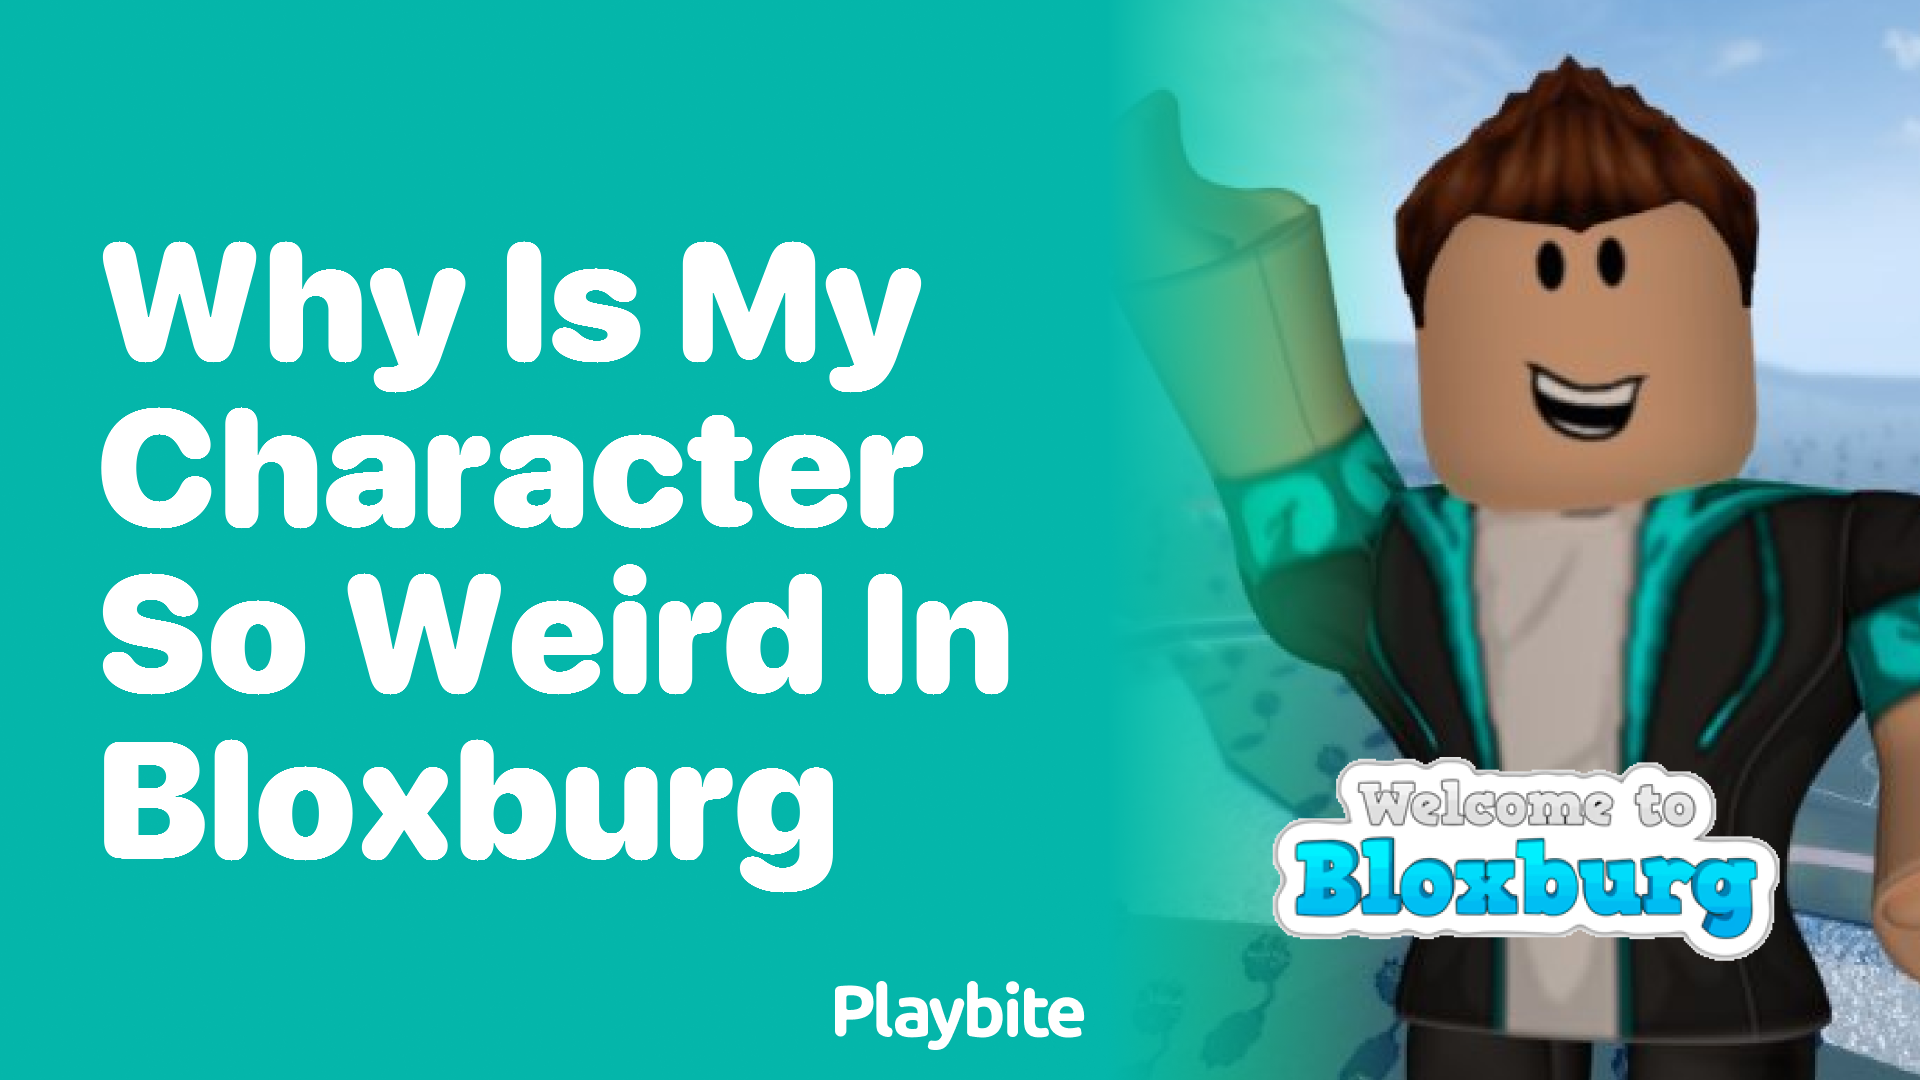 Why Is My Character So Weird in Bloxburg?